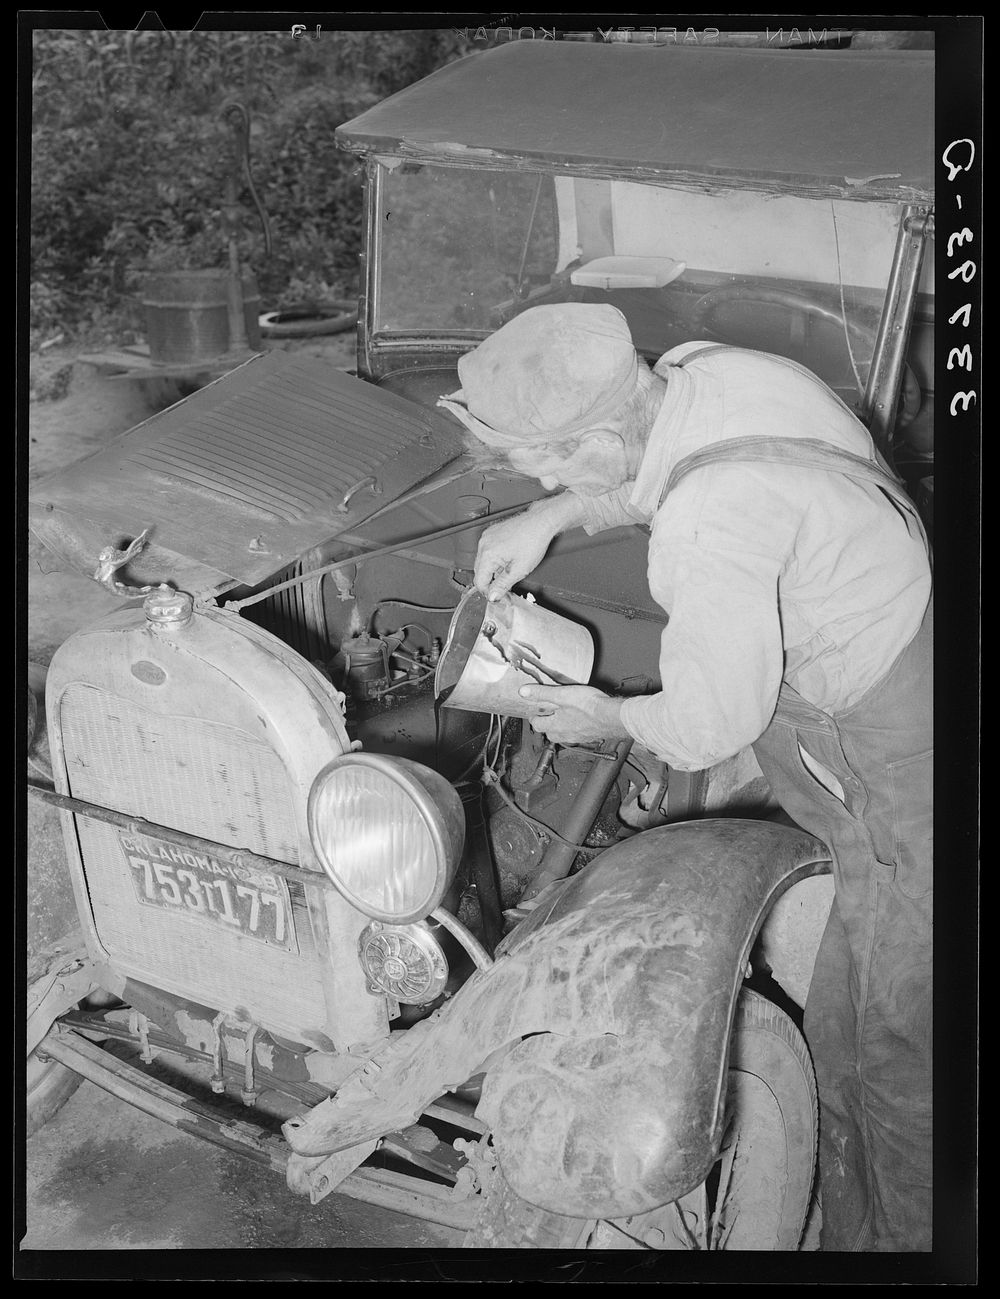 Elmer Thomas, migrant to California, pouring oil into engine preparatory for departure to California. Oklahoma by Russell Lee